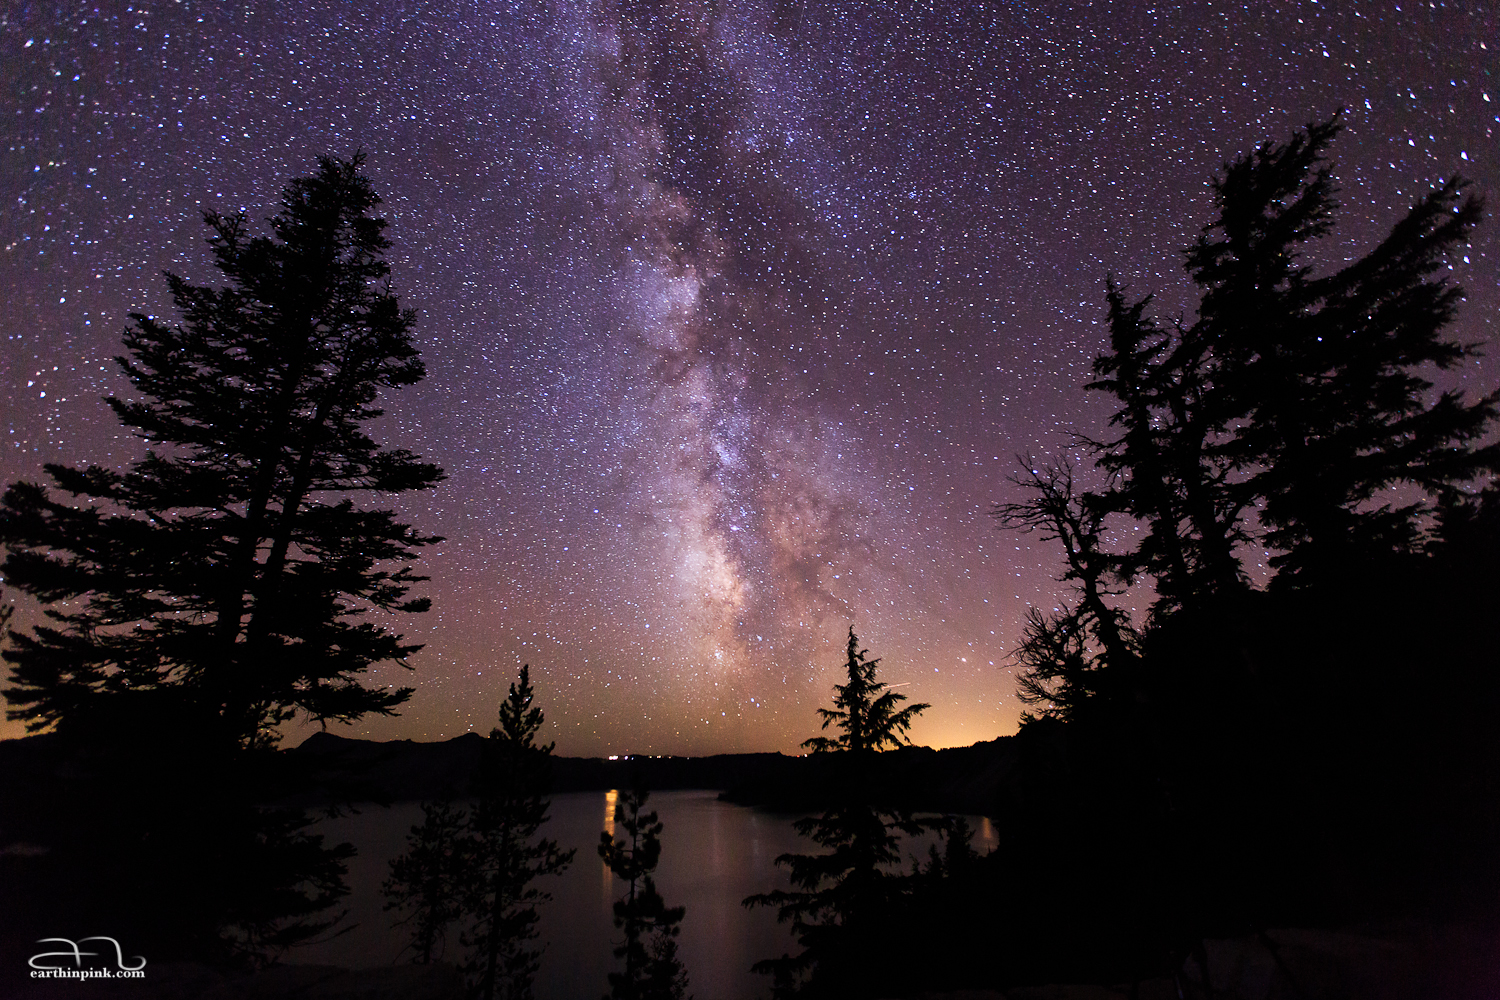 The Milky Way above Crater Lake, Oregon